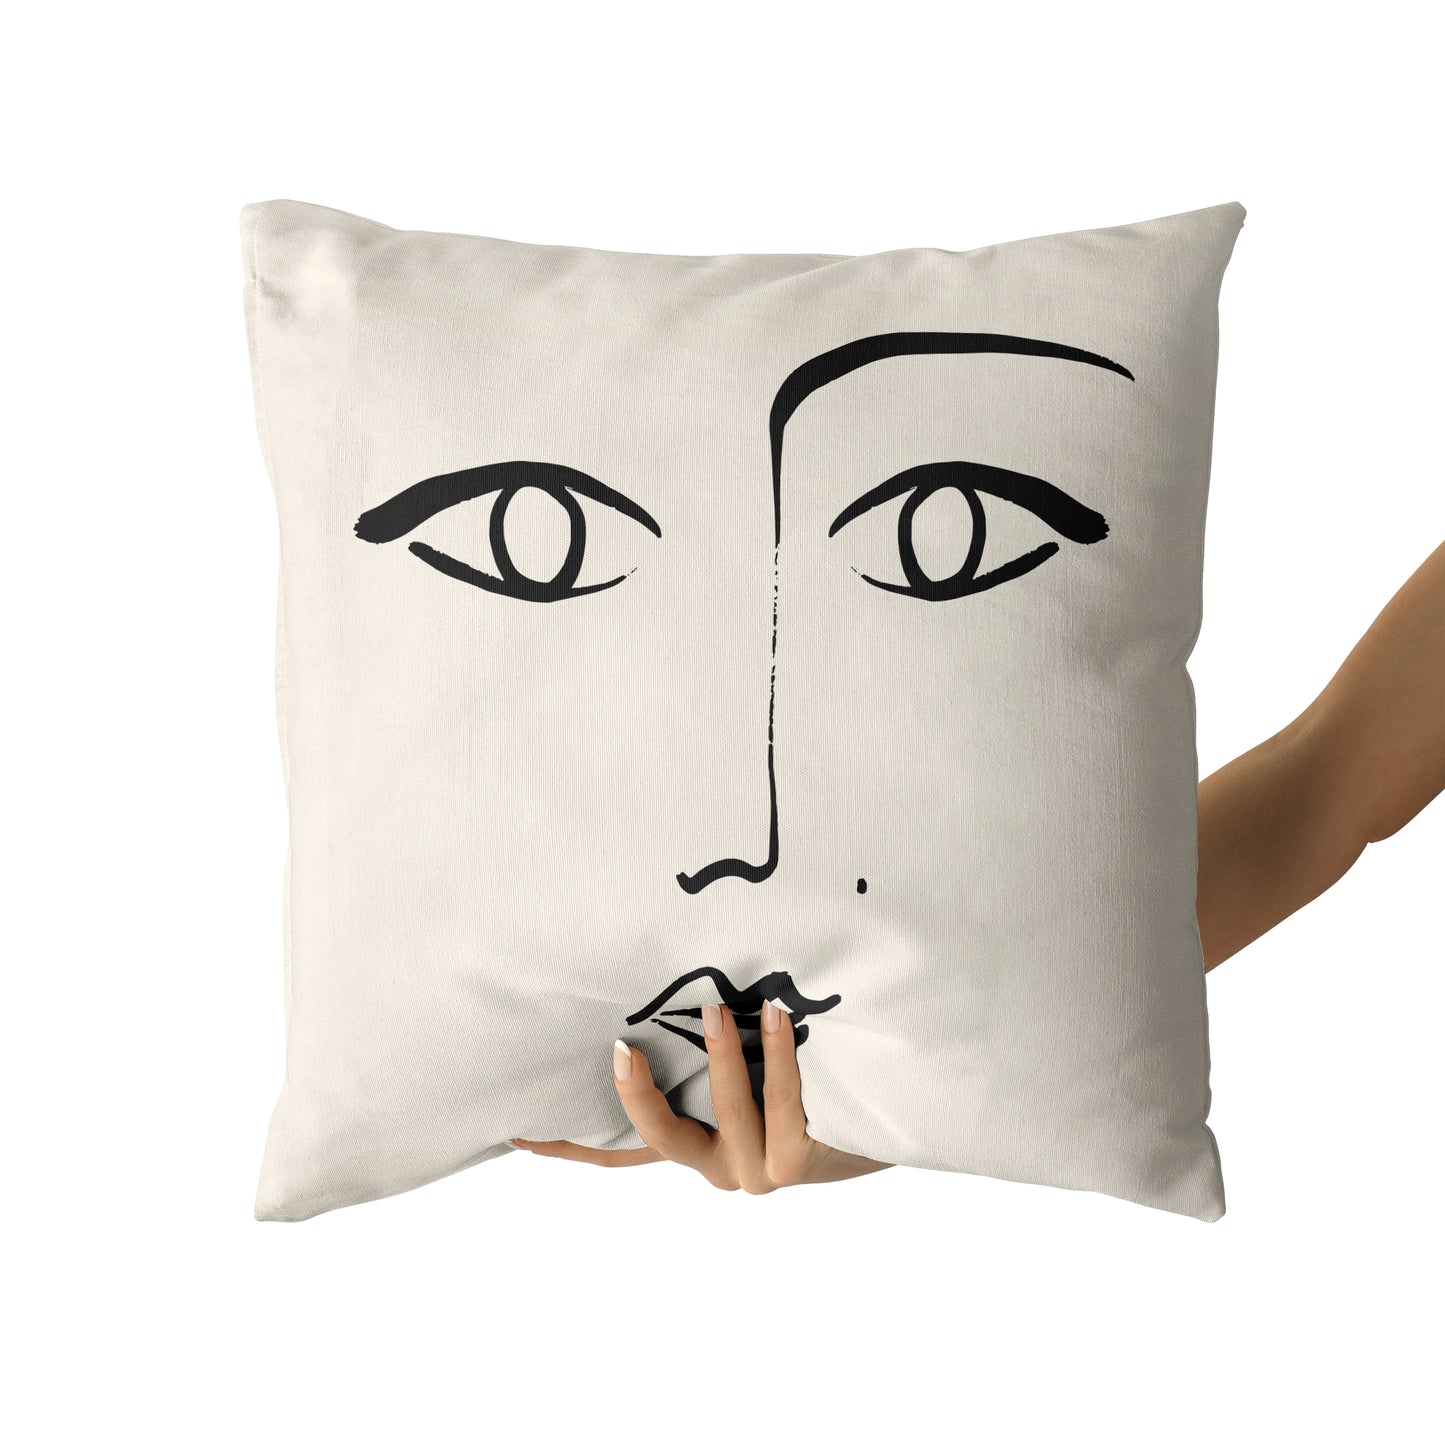 Bright Beige Throw Pillow with Woman Face